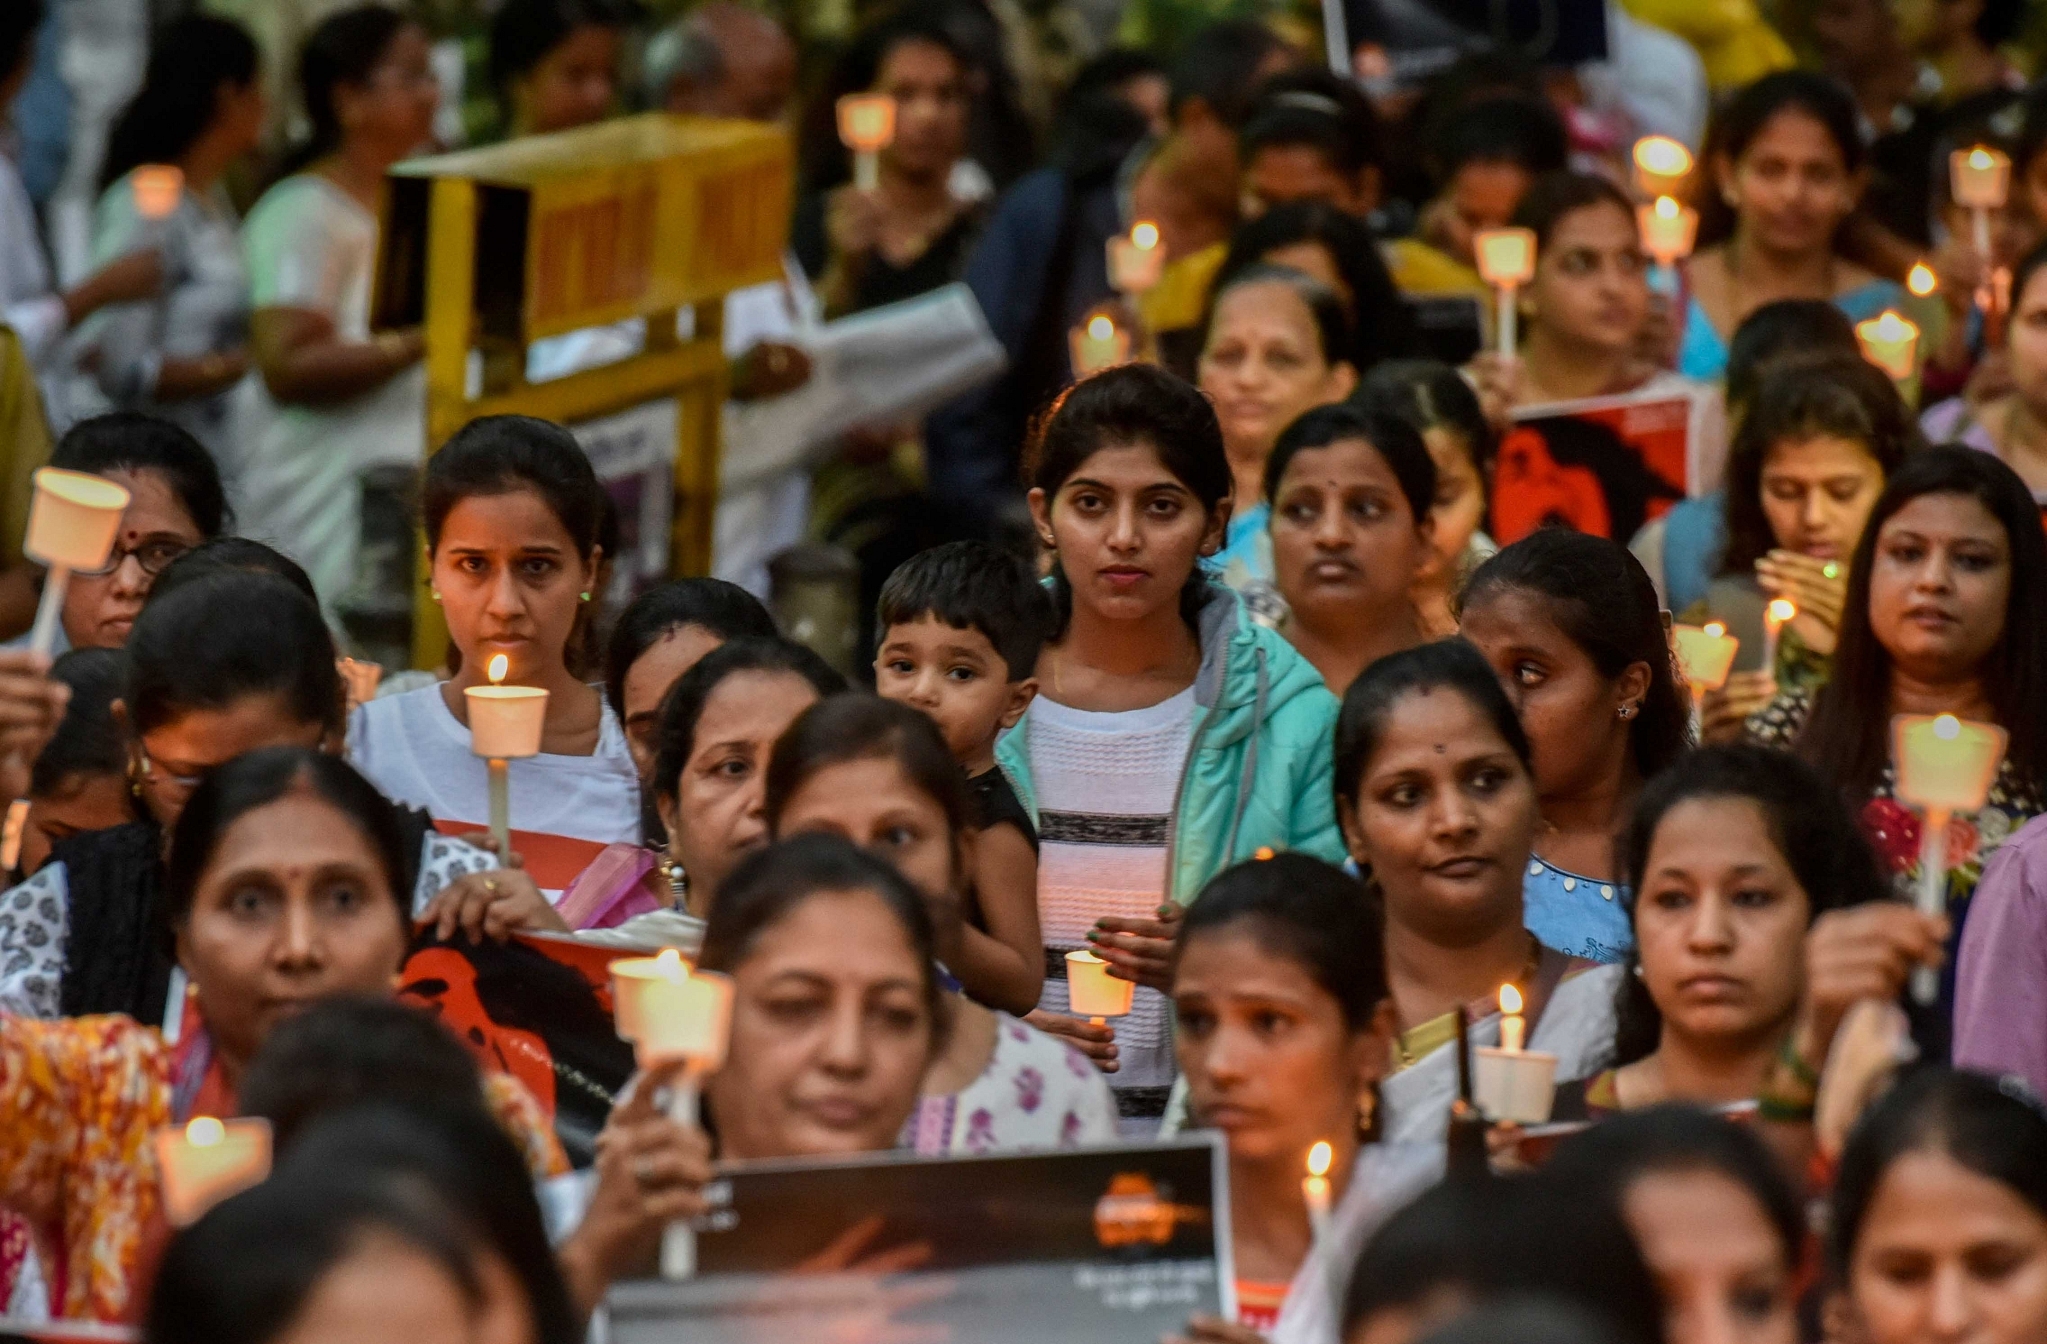 Activists pay tribute to Kopardi incident victim in Mumbai. (Kunal Patil/Hindustan Times via Getty Images)